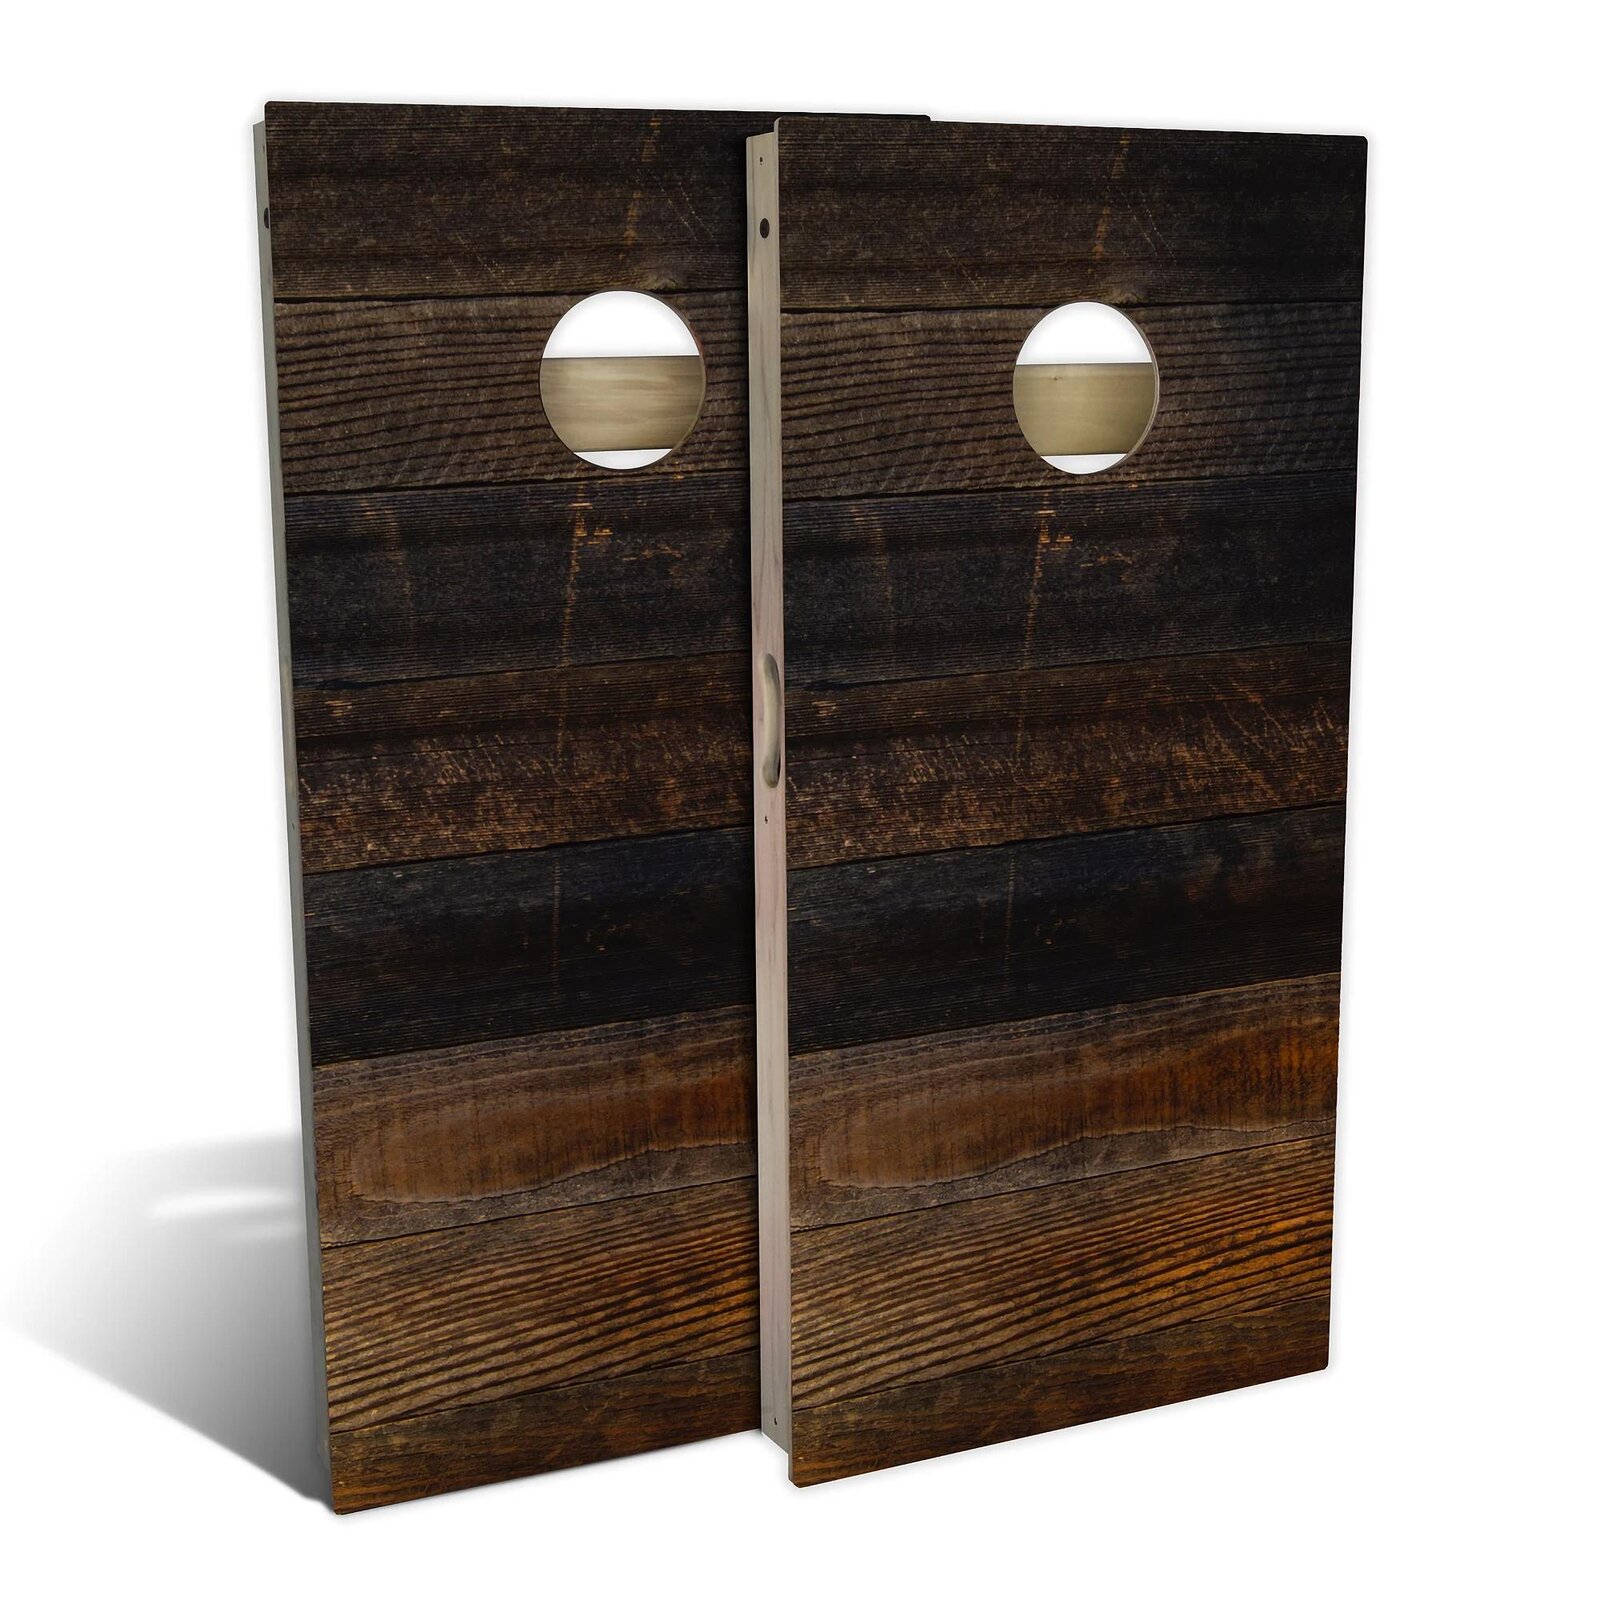 Skip's Garage 2' x 3' Country Living Burnt Shiplap Solid Wood Cornhole Board Set with Hole Lights